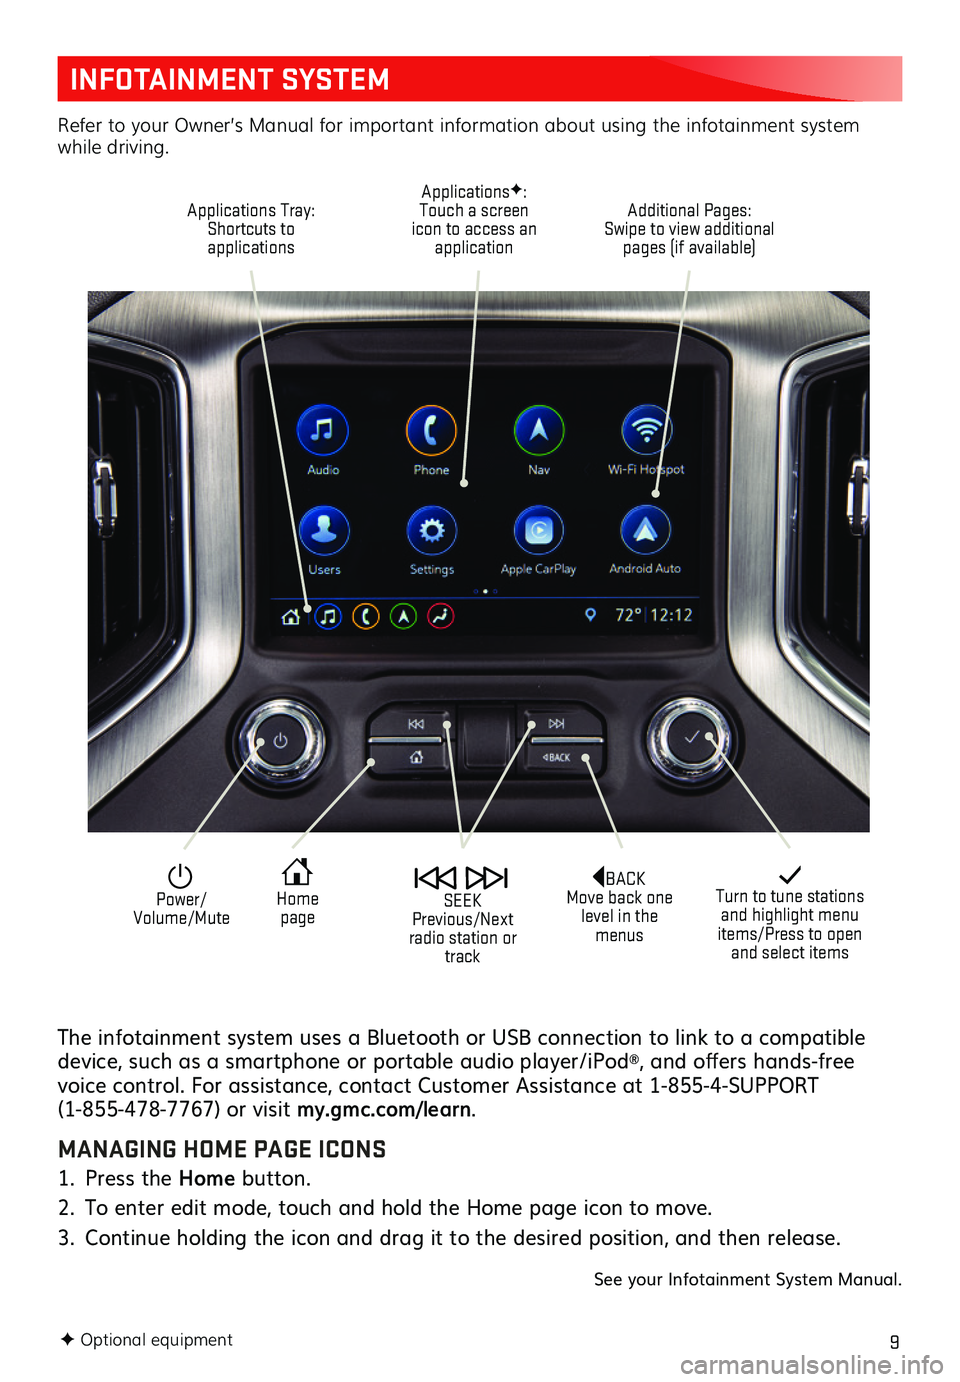 GMC SIERRA 2019  Get To Know Guide 9
INFOTAINMENT SYSTEM
The infotainment system uses a Bluetooth or USB connection to link to a compatible device, such as a smartphone or portable audio player/iPod®, and offers hands-free voice contr